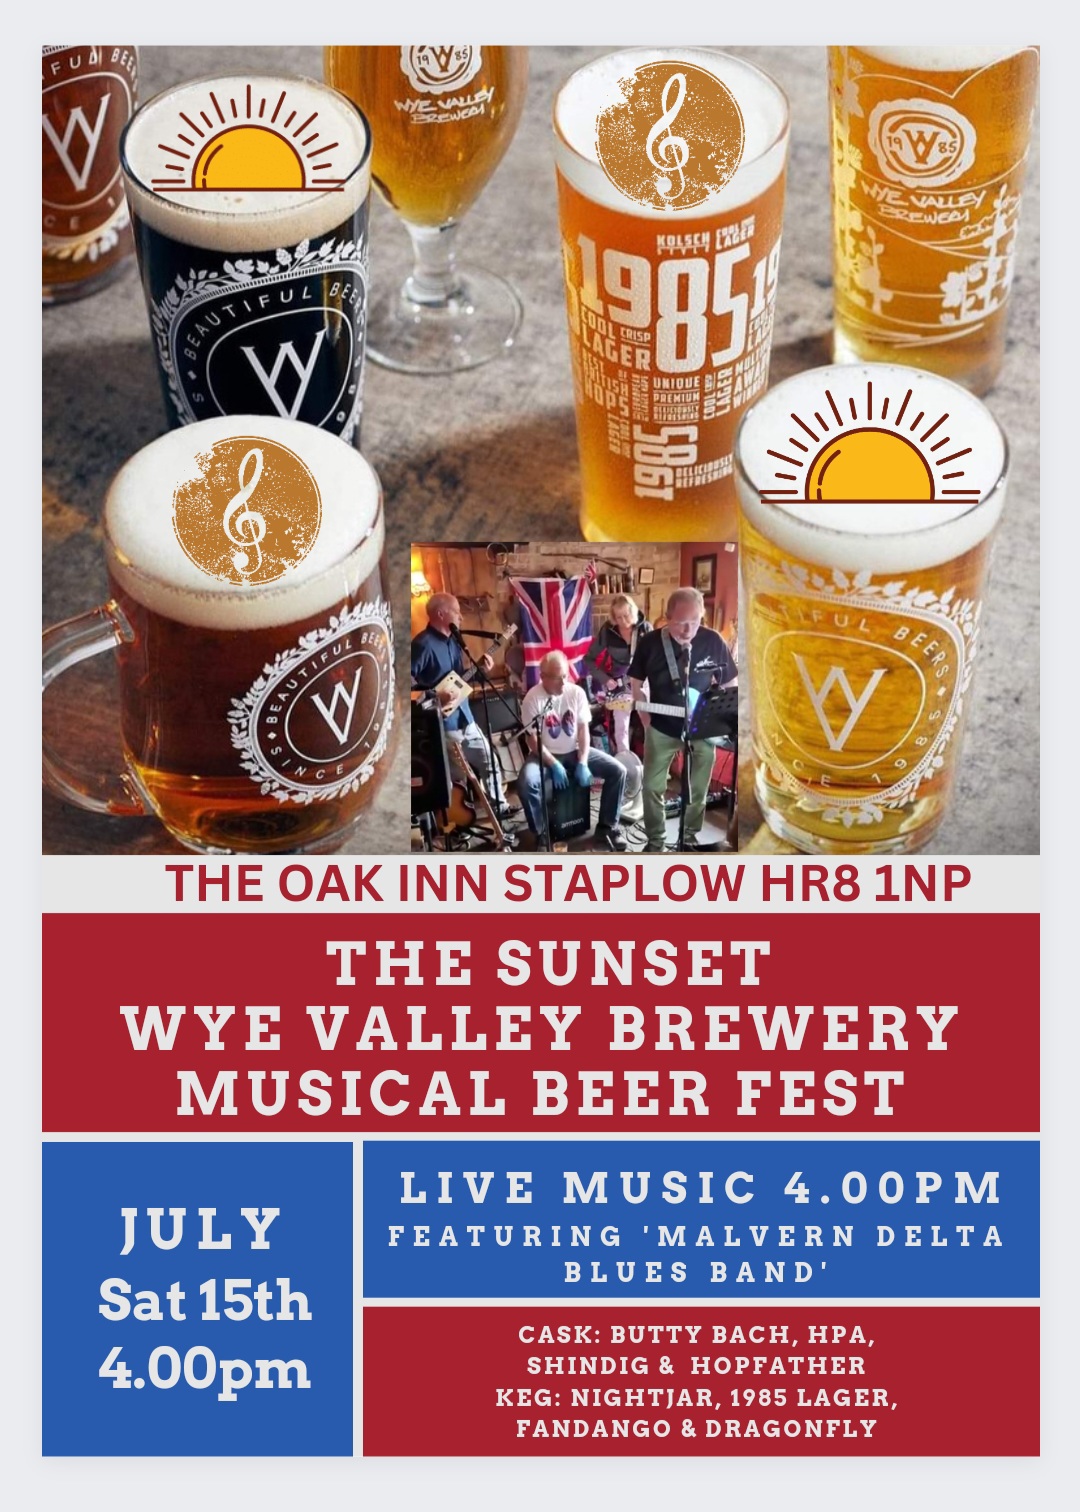 THE SUNSET WYE VALLEY BREWERY SUMMER MUSICAL BEER FEST HR8 1NP on Fri/Sat/Sun July 14th,15th & 16th